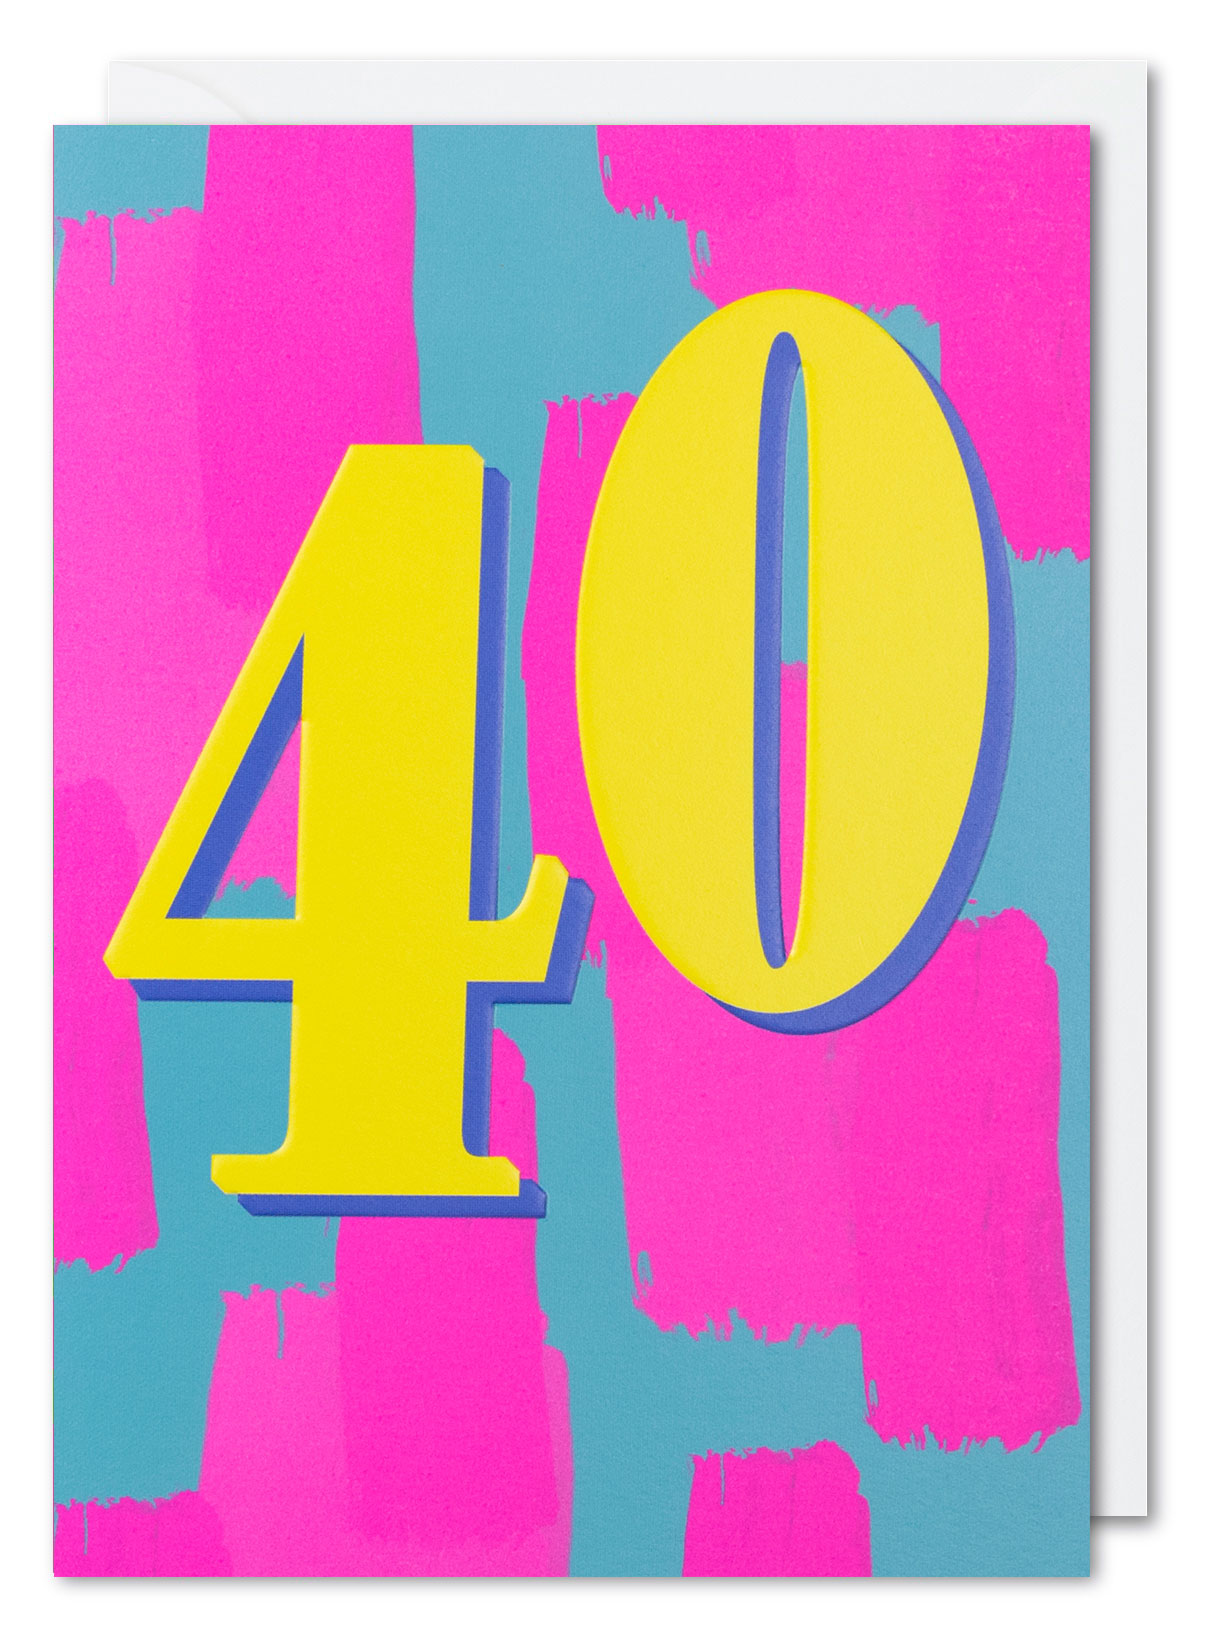 Zesty Graphic 40th Birthday Card by penny black